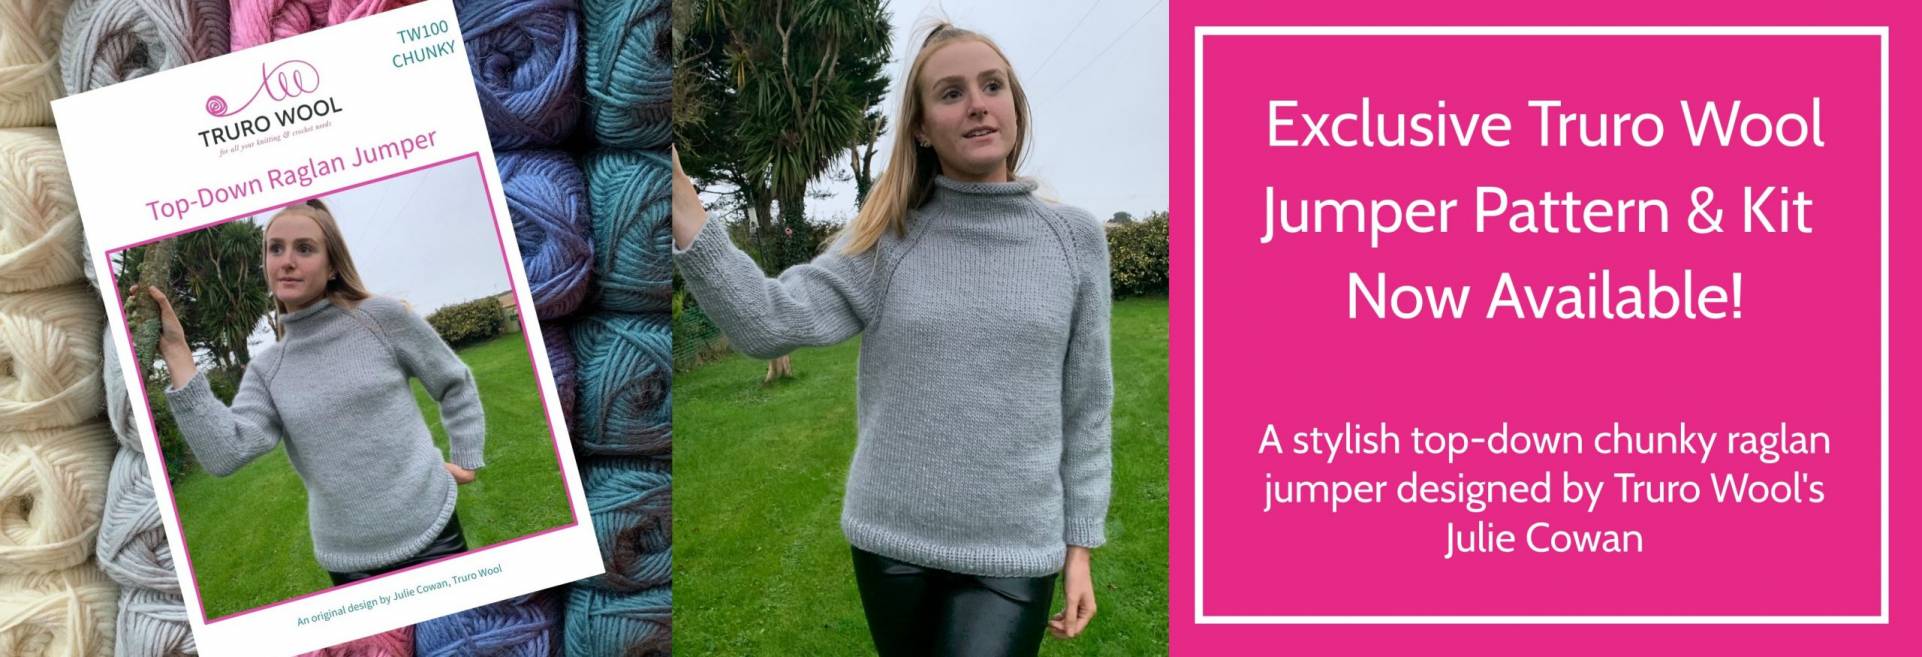 Truro Wool Top Down Jumper Pattern and Kit Banner